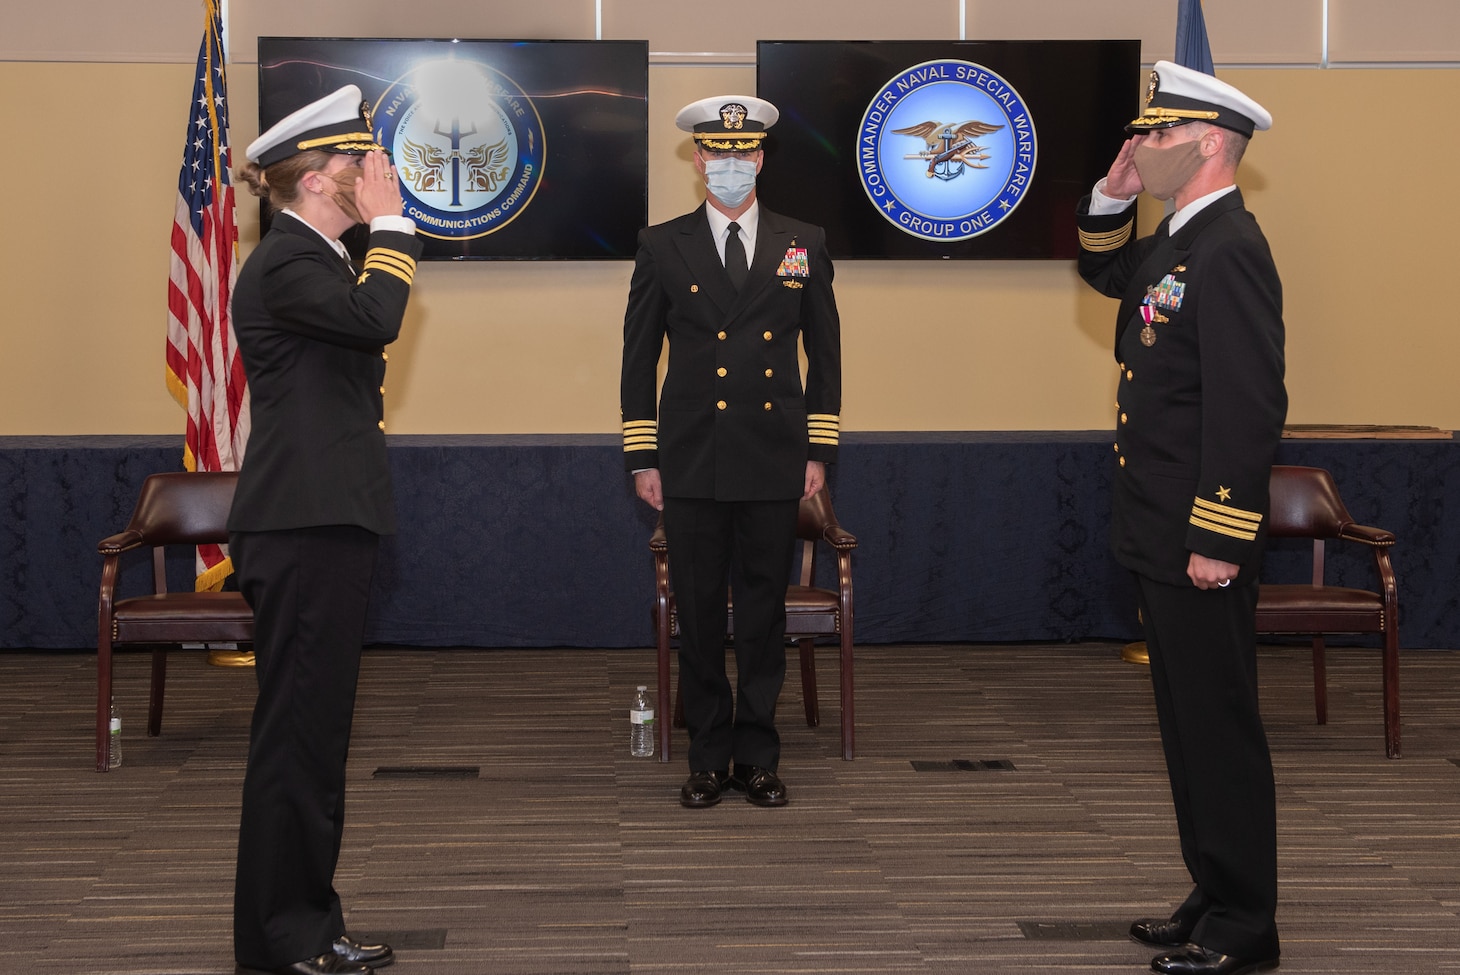 Cmdr. Blythe Blakistone, left, relieves Cmdr. David West, right, as commanding officer of Naval Special Warfare Tactical Communications Command (TCC) 1 during a change of command ceremony at Naval Base Coronado.